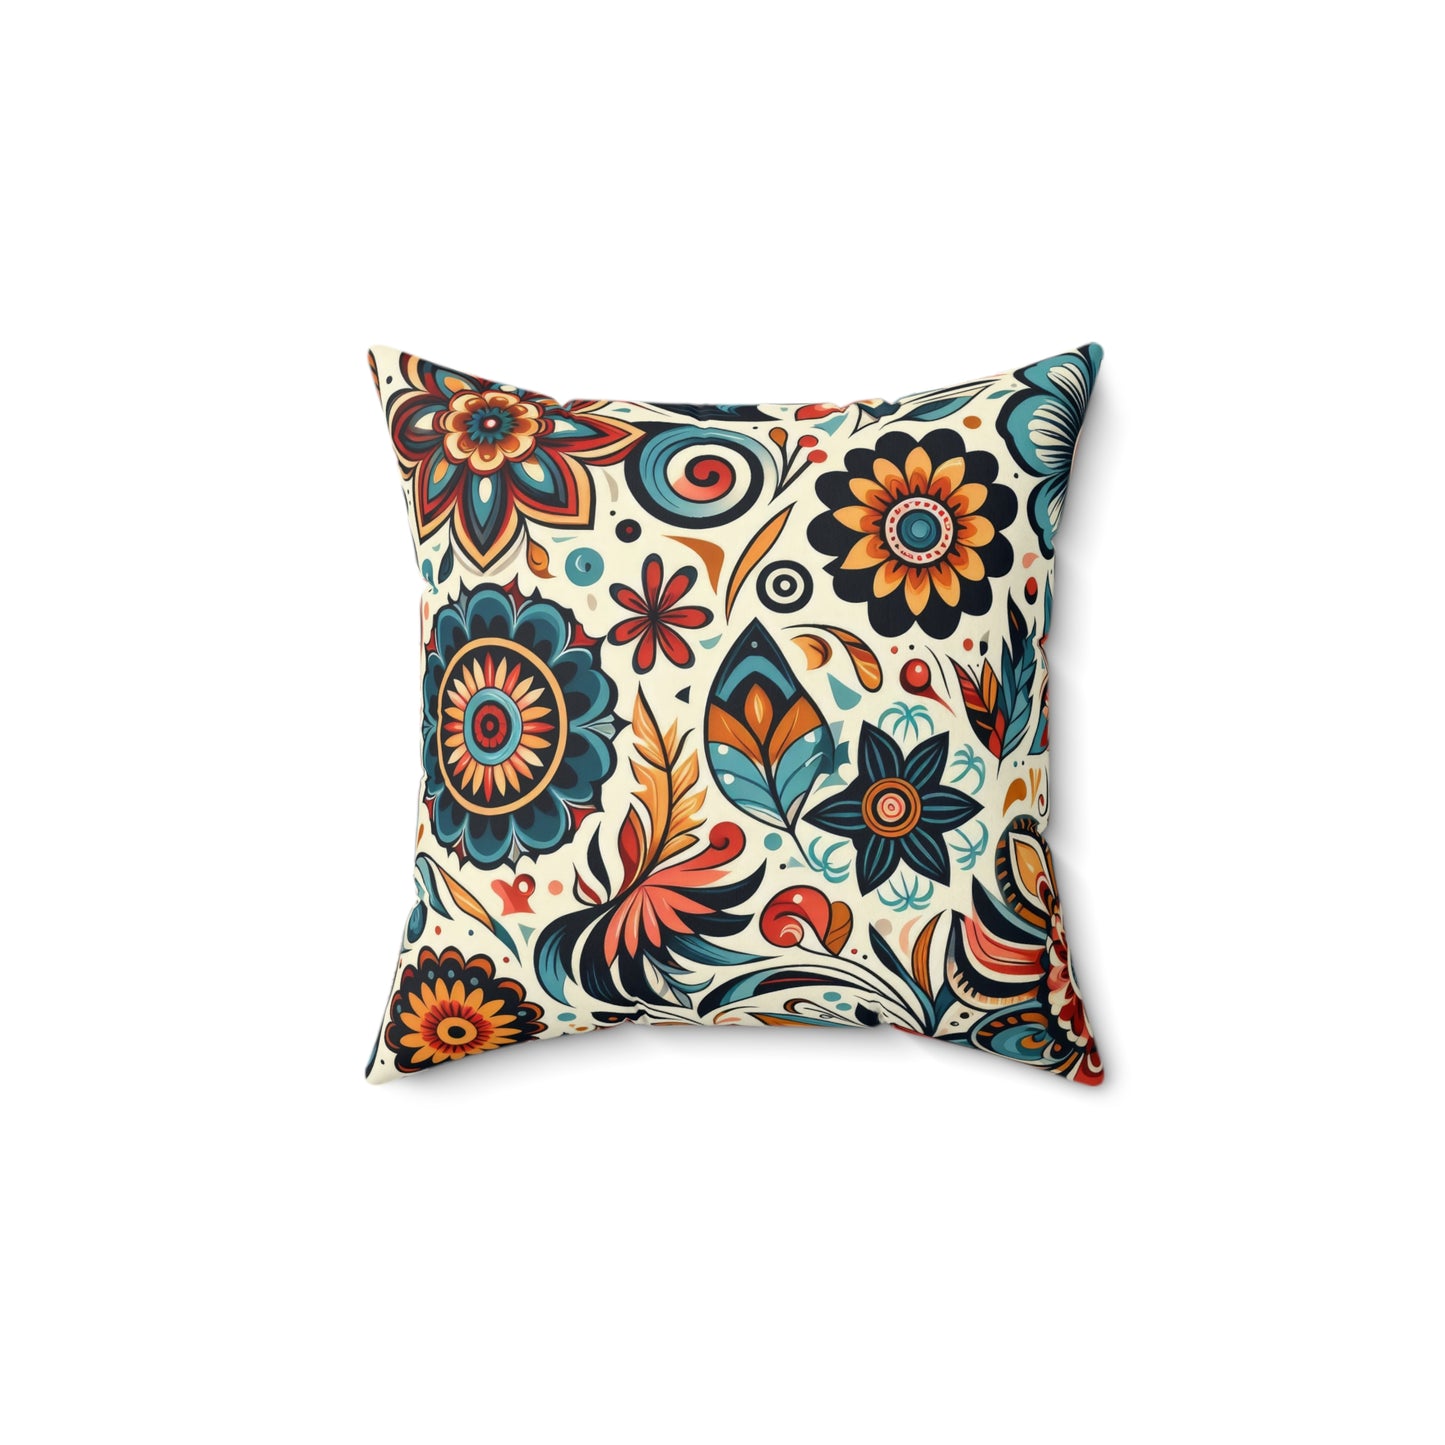 Bohemian Floral Style Polyester Square Throw Pillow